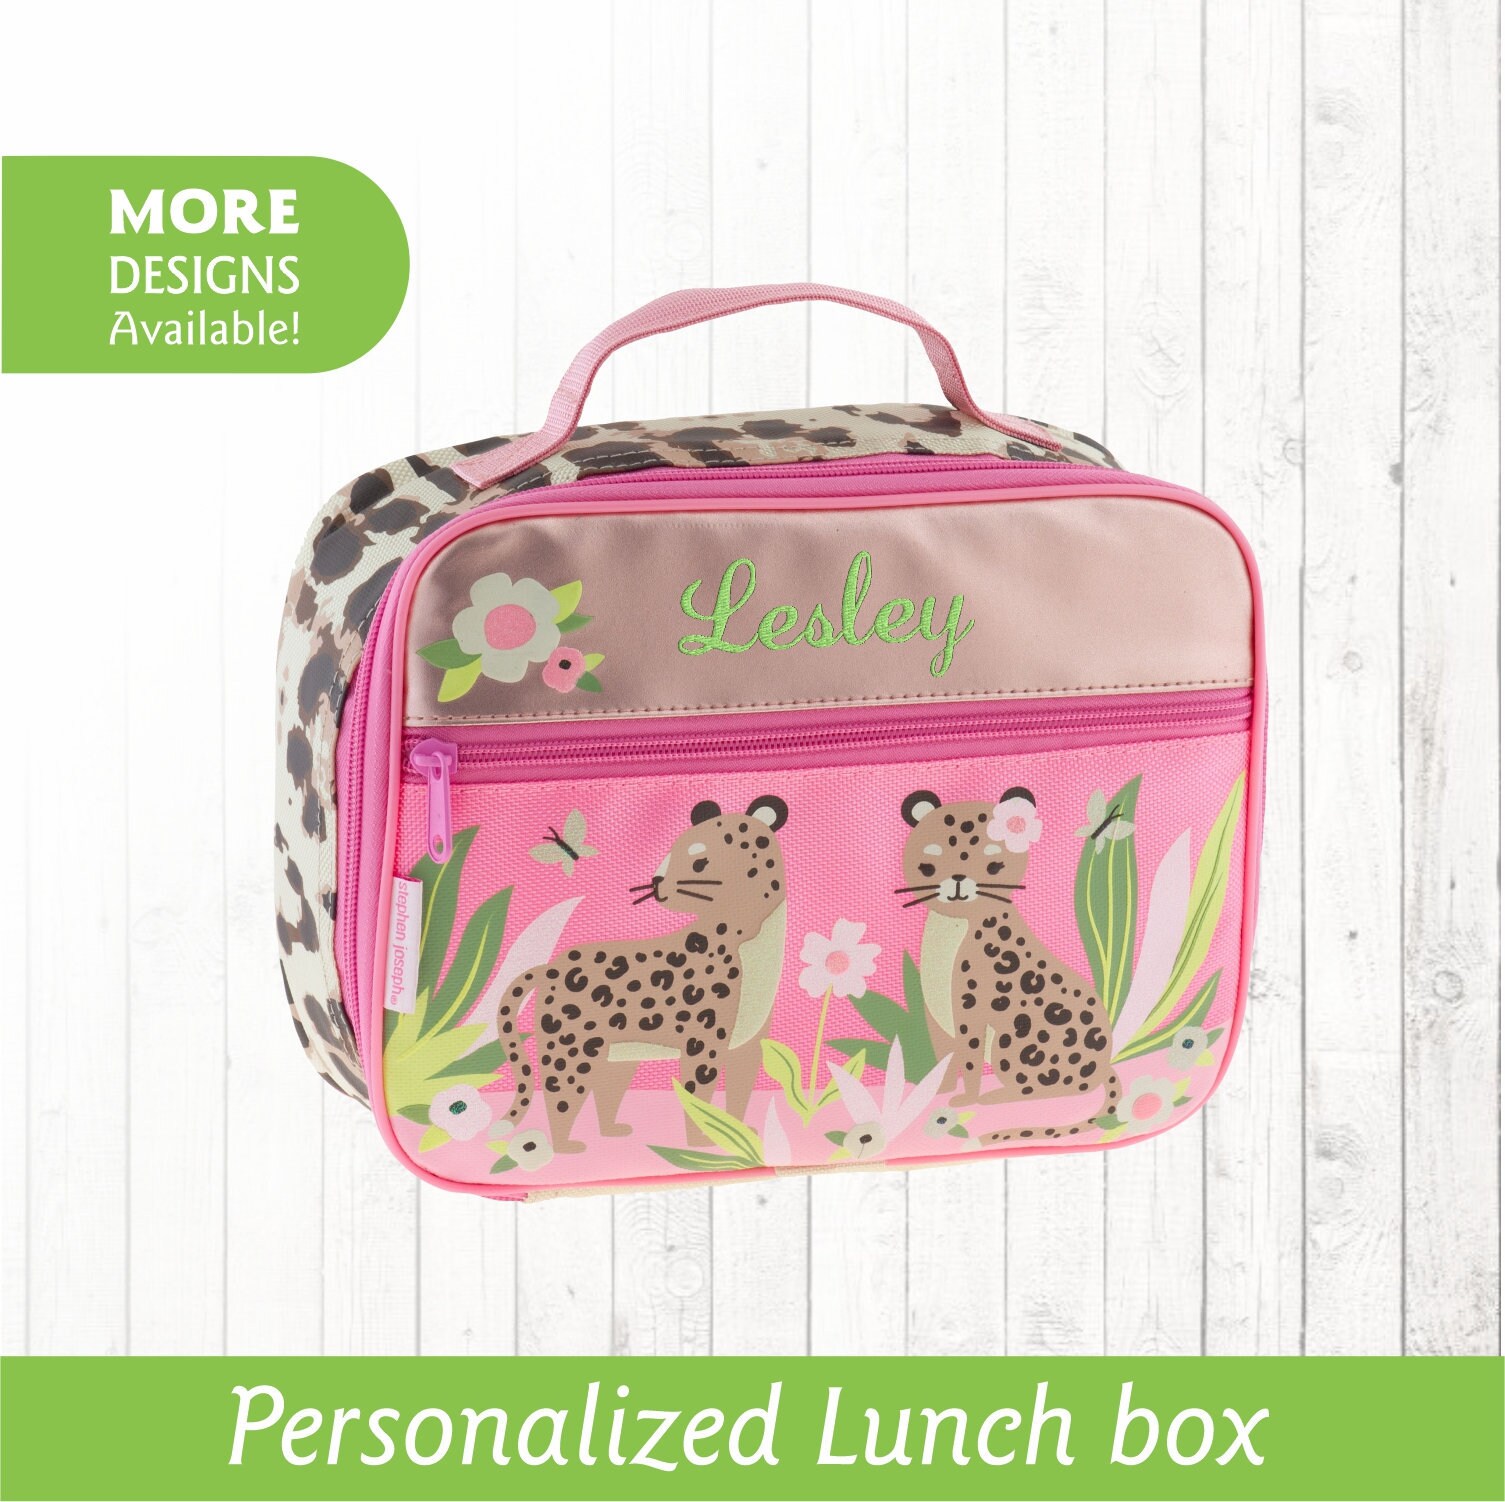 Monogrammed or Personalized Packit Lunch Box Hampton Style for